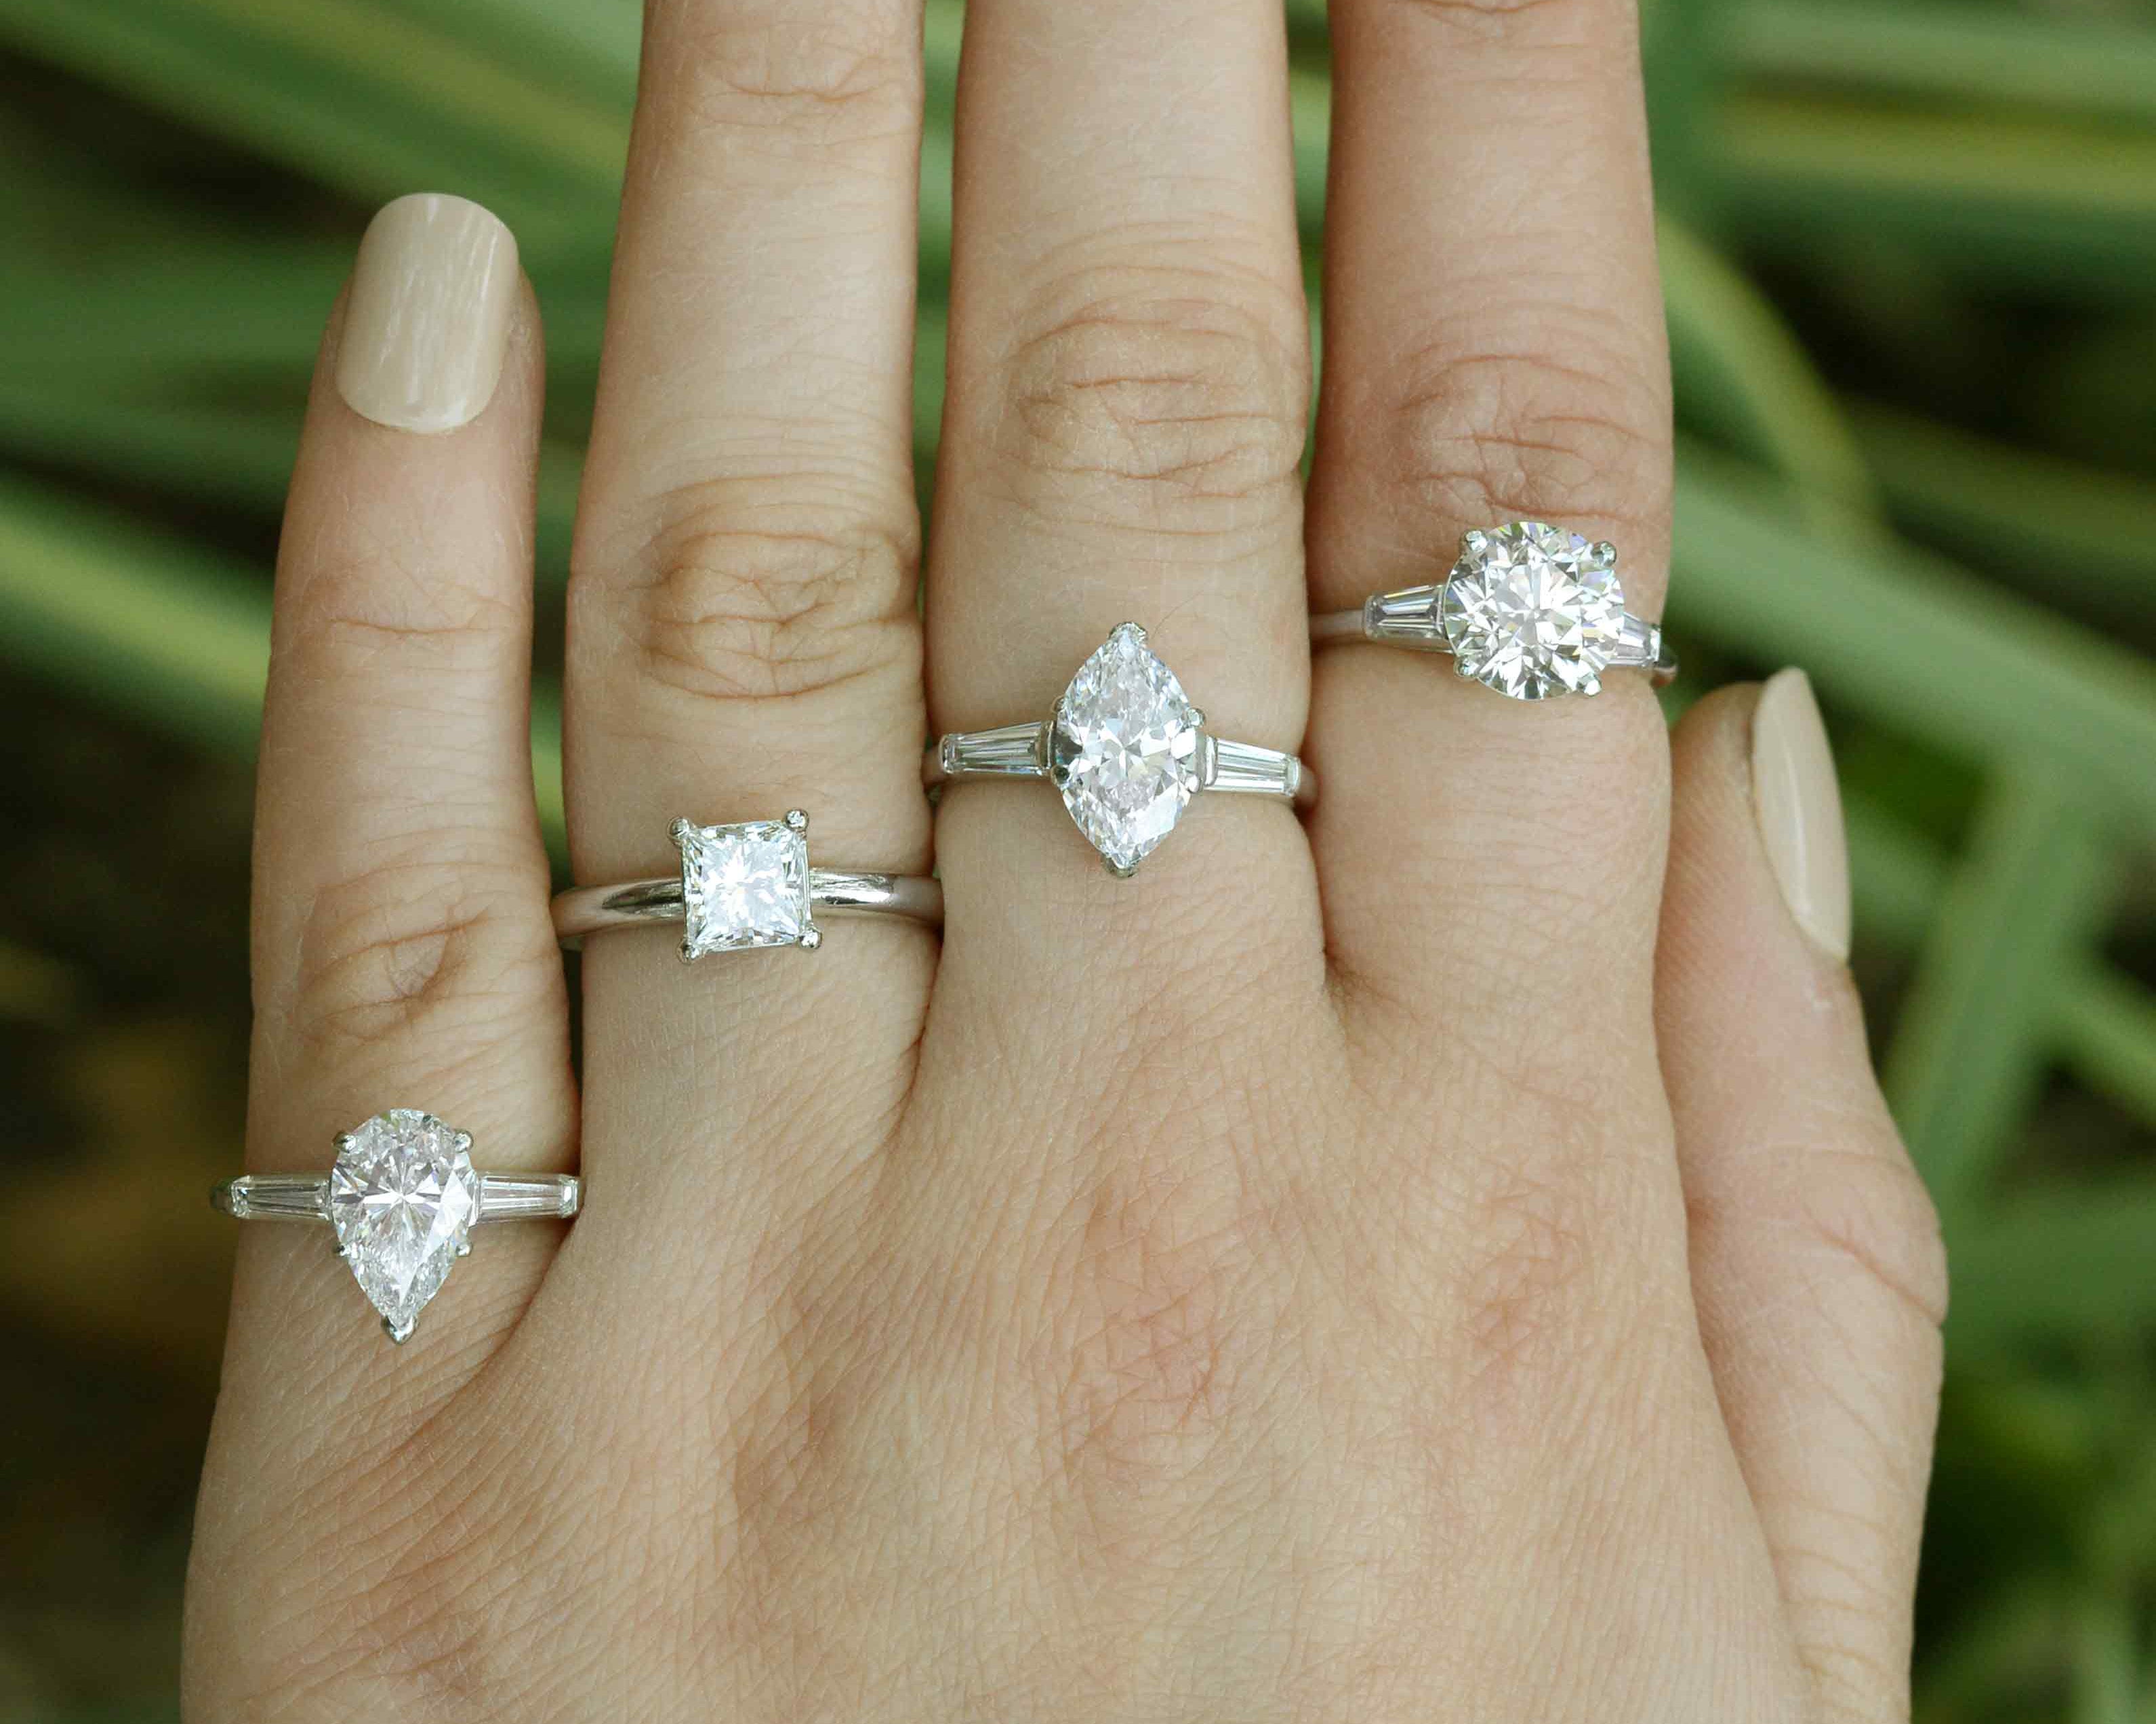 Some of our contemporary estate diamond engagement rings.